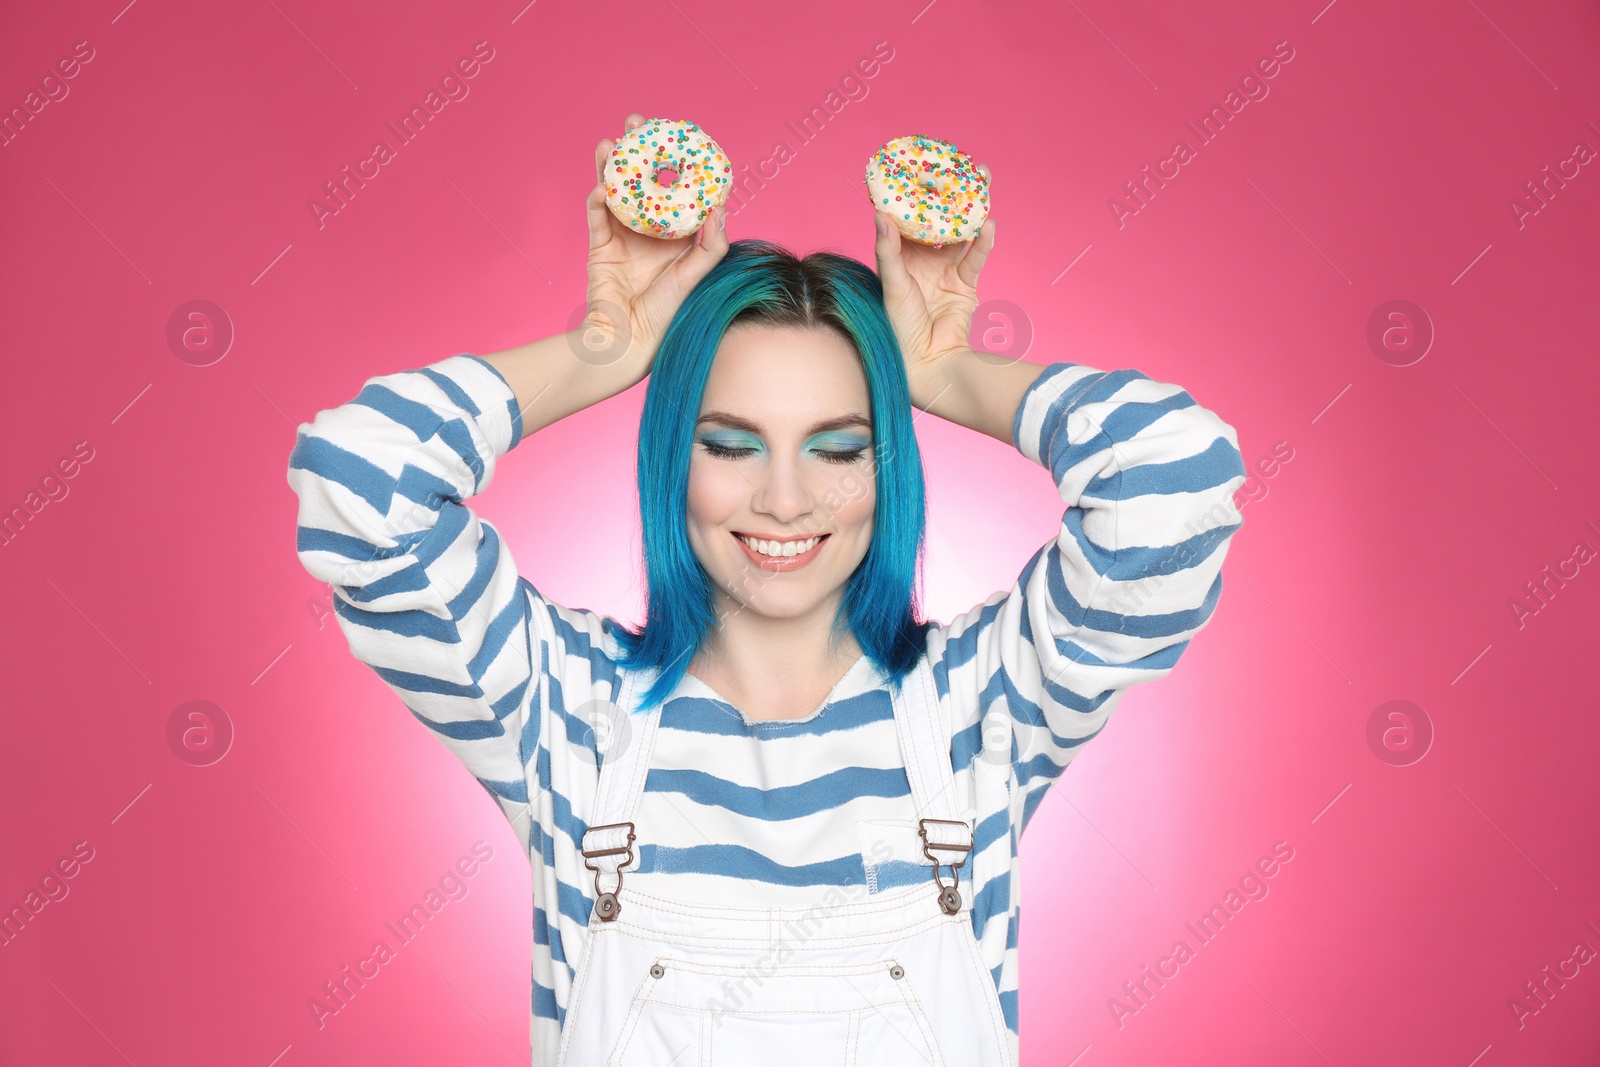 Photo of Young woman with bright dyed hair holding donuts on pink background